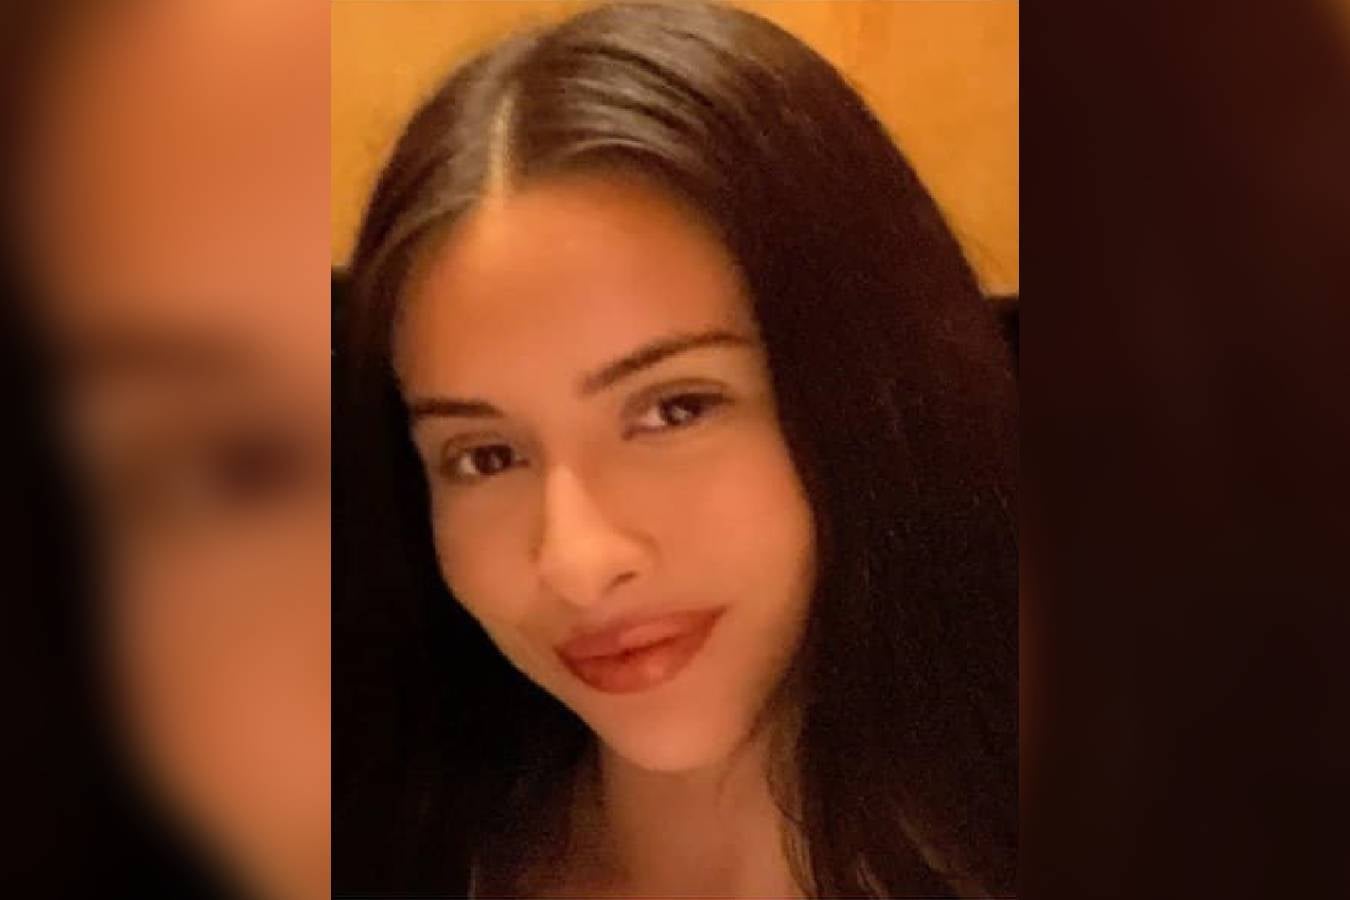 A search is underway for California woman Andrea Vazquez who was shot and abducted from her boyfriend’s car after a shooting at a park near Los Angeles.